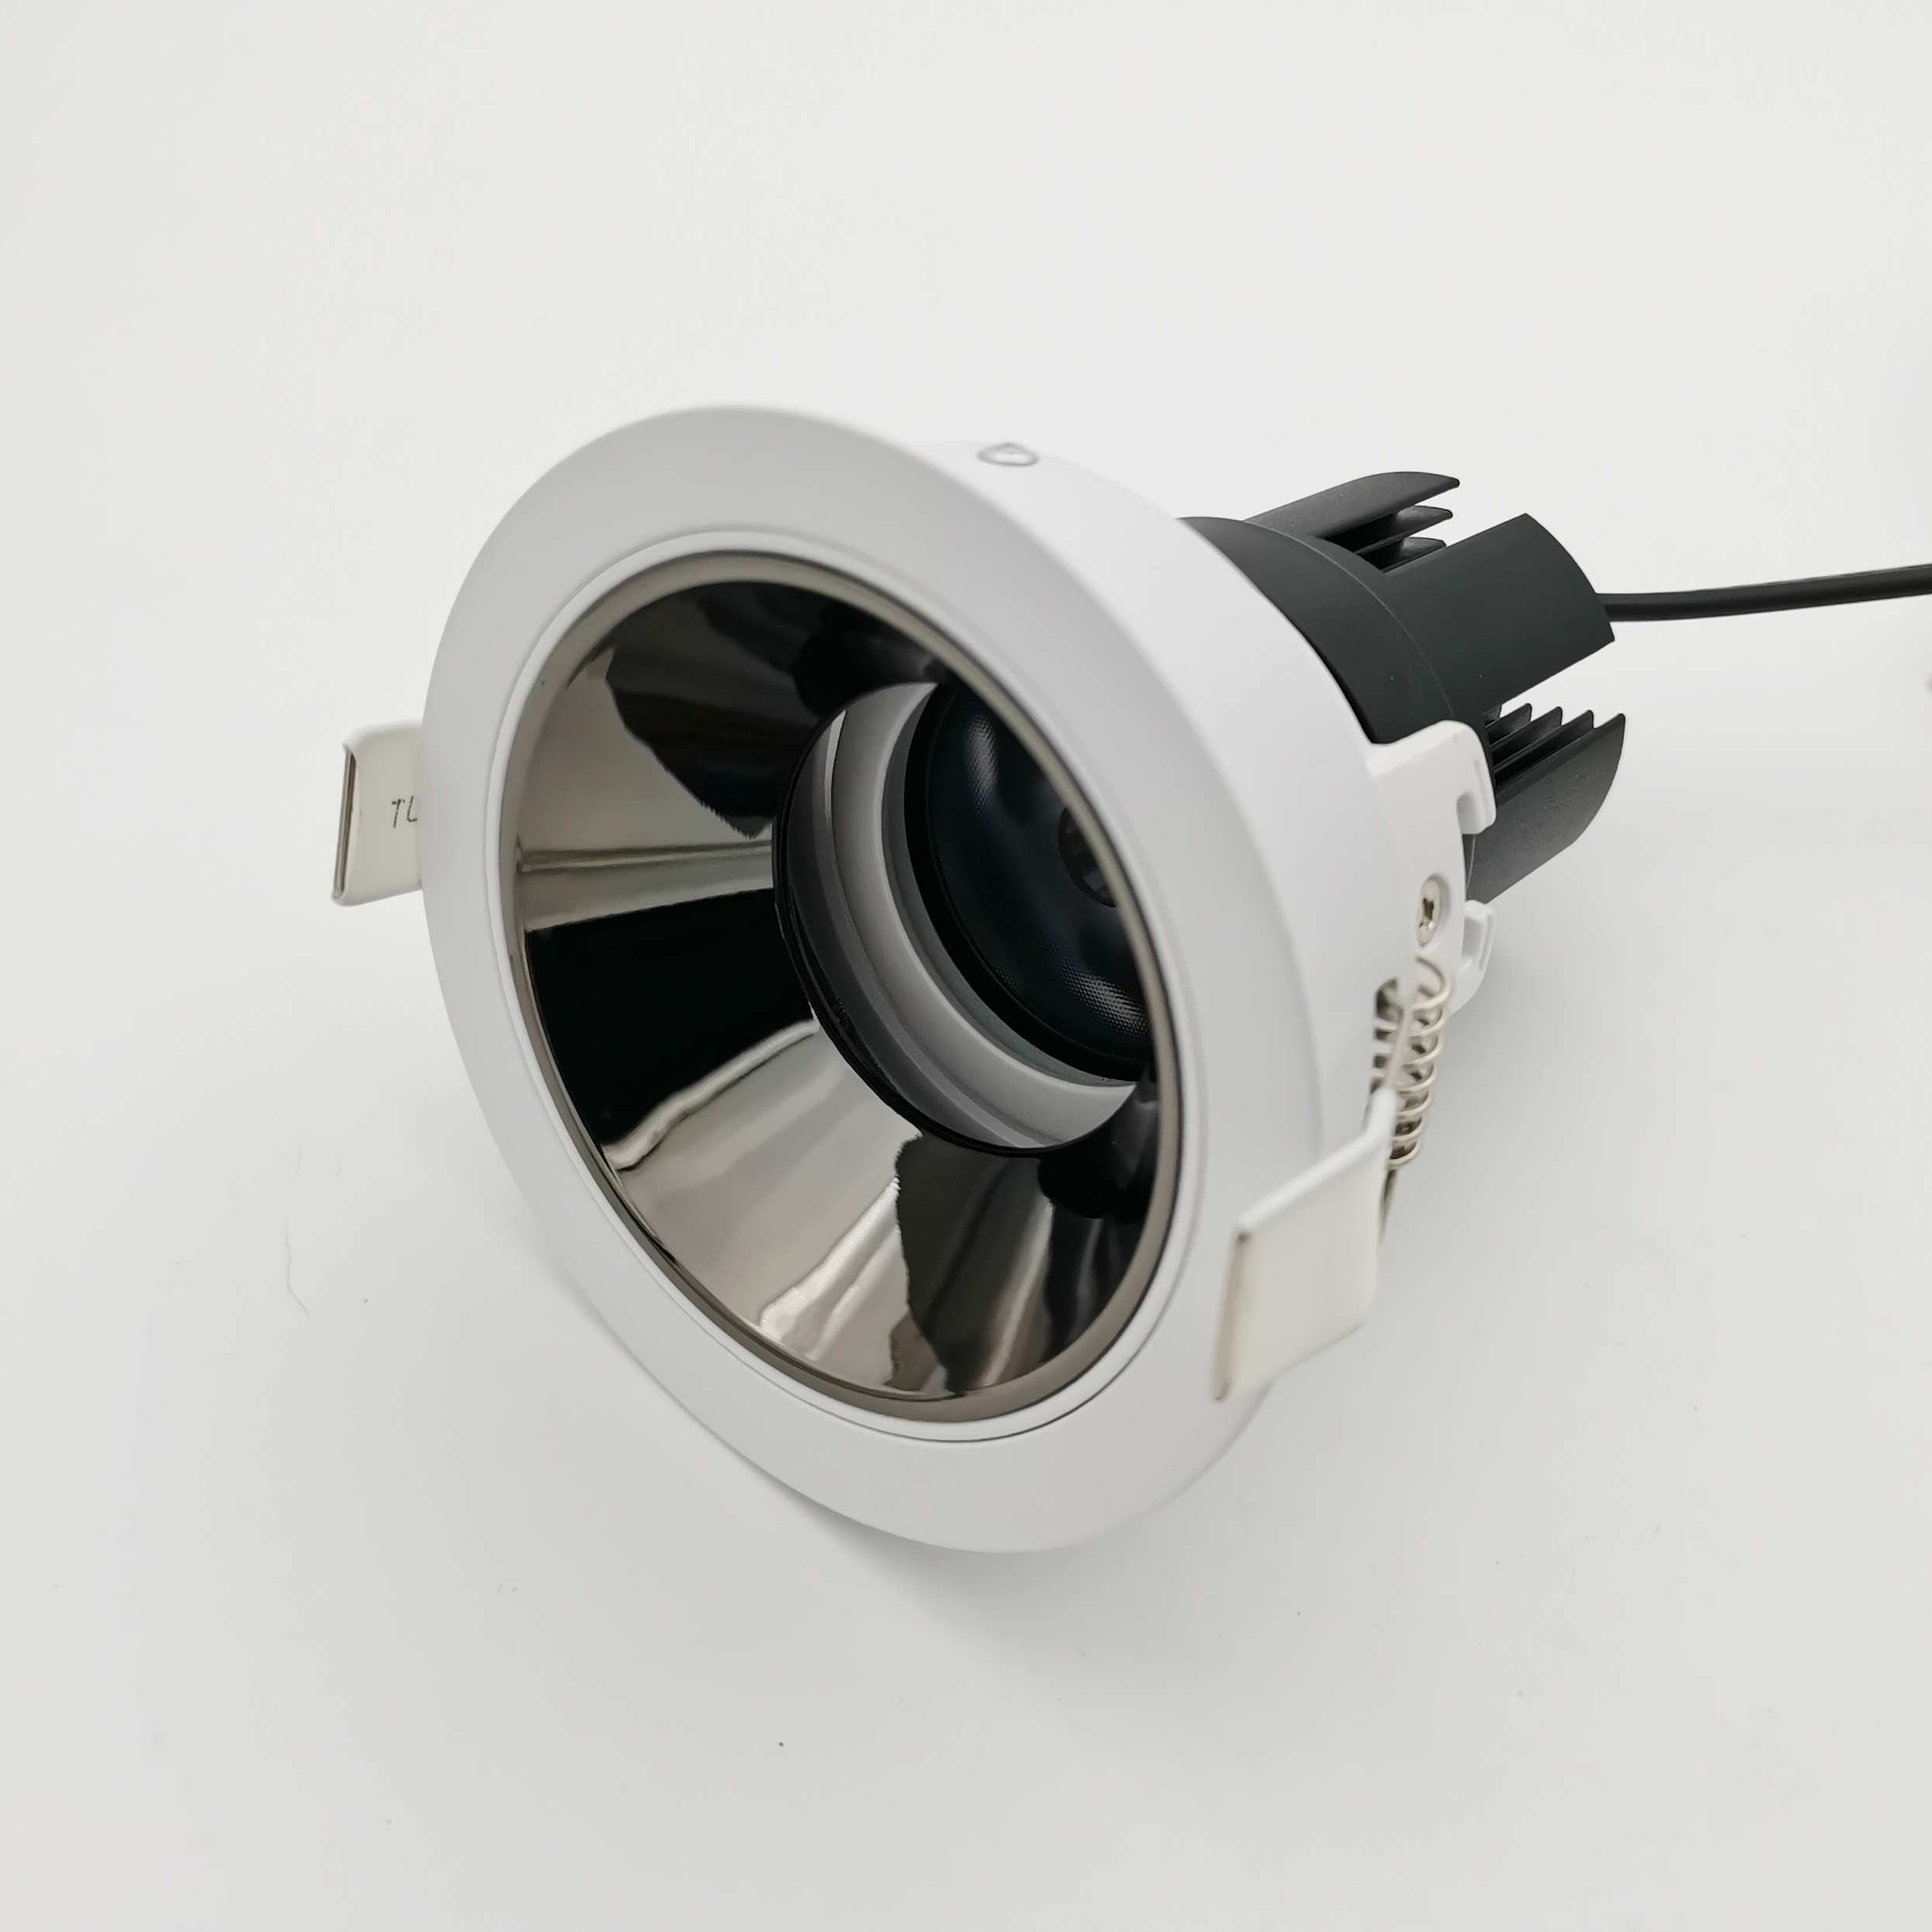 85mm Outcut 7w 12w 15w 20w residential and commercial Downlight LED Daylight Recessed Lighting LED Light adjustable LED Downlight